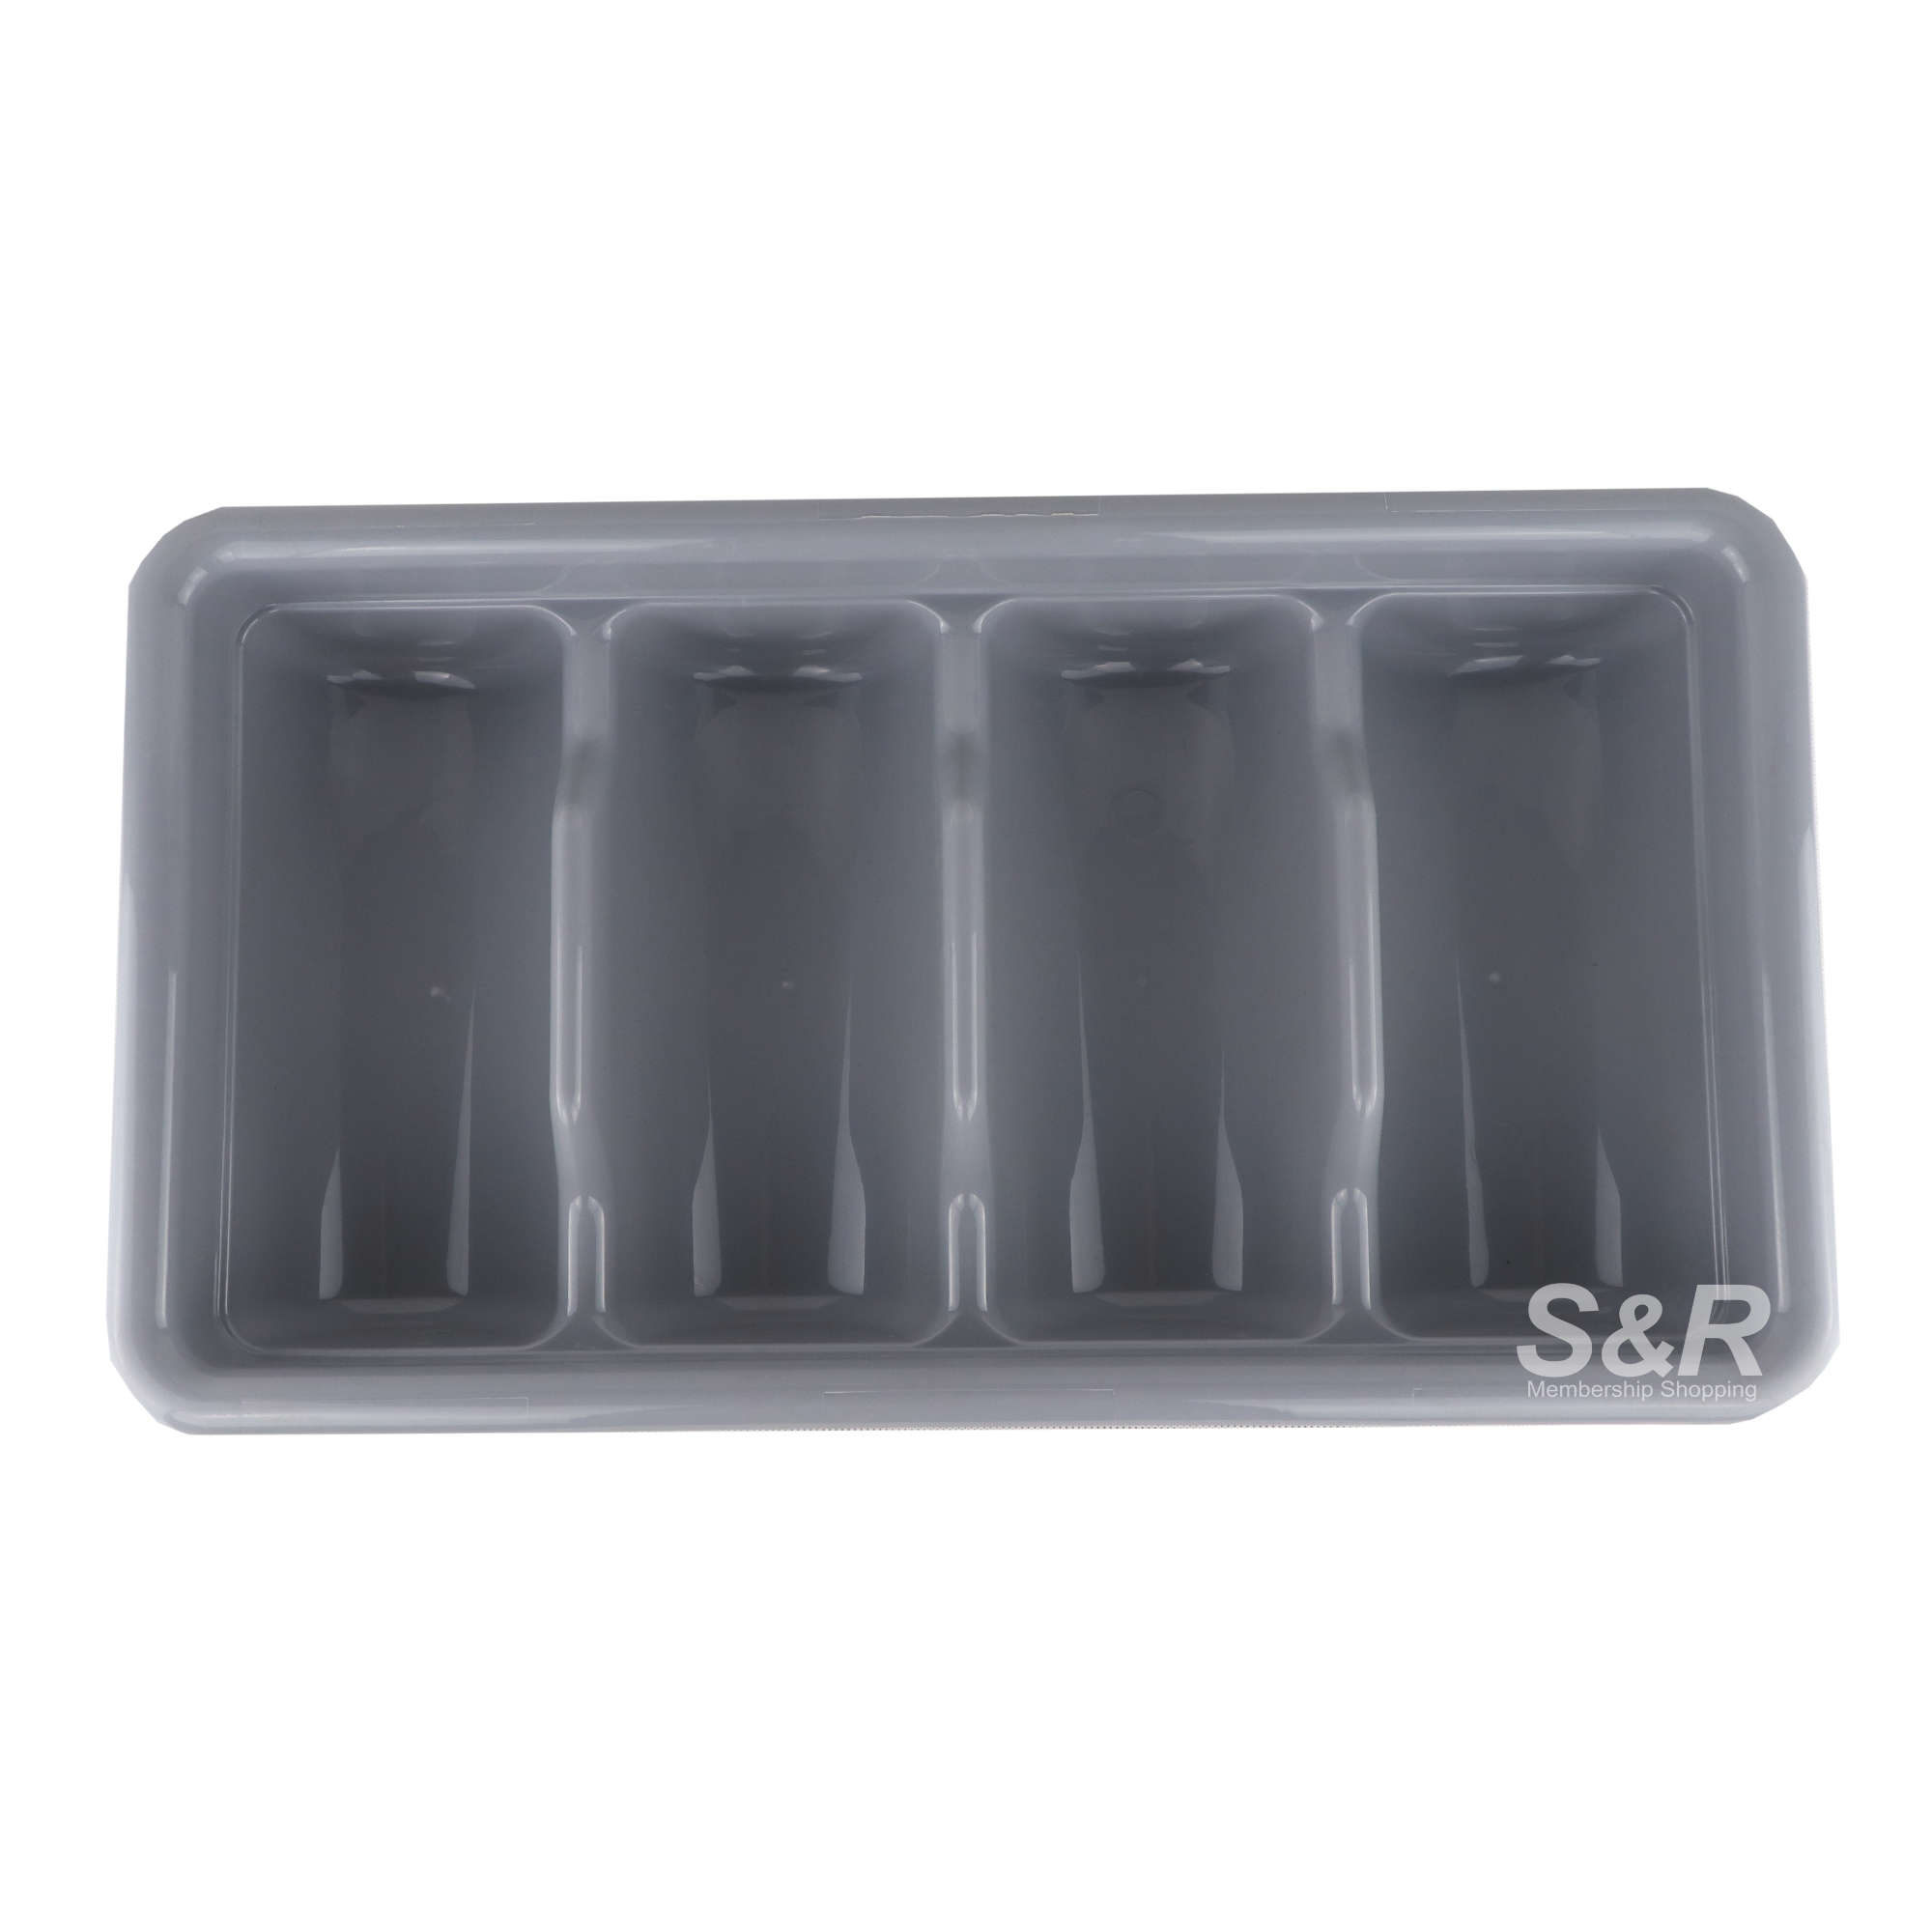 Kitchenmaster Flatware Tray 4-Division 1pc